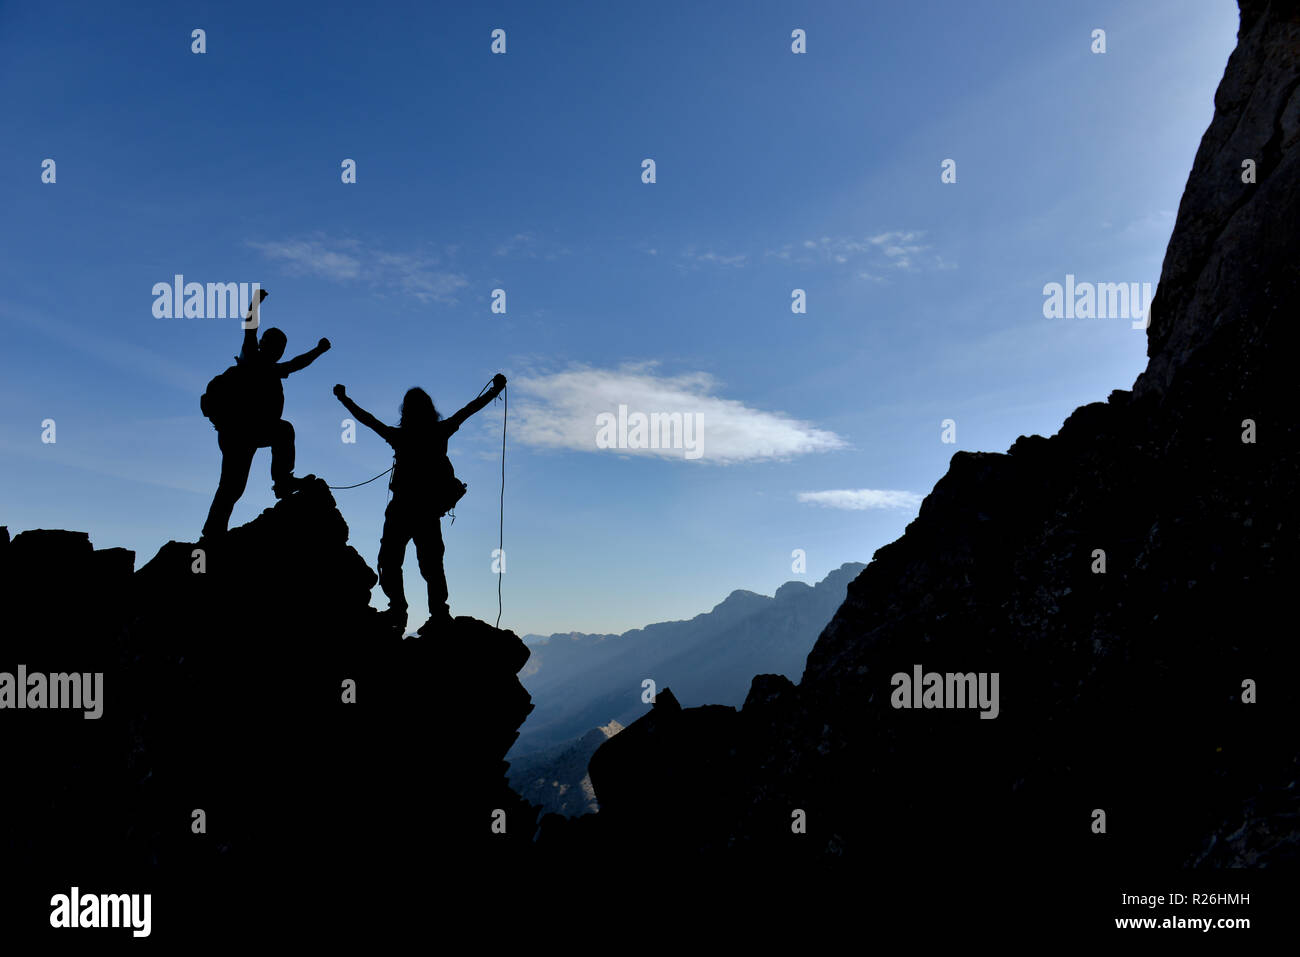 rock climbing and challenging challenging mountains Stock Photo